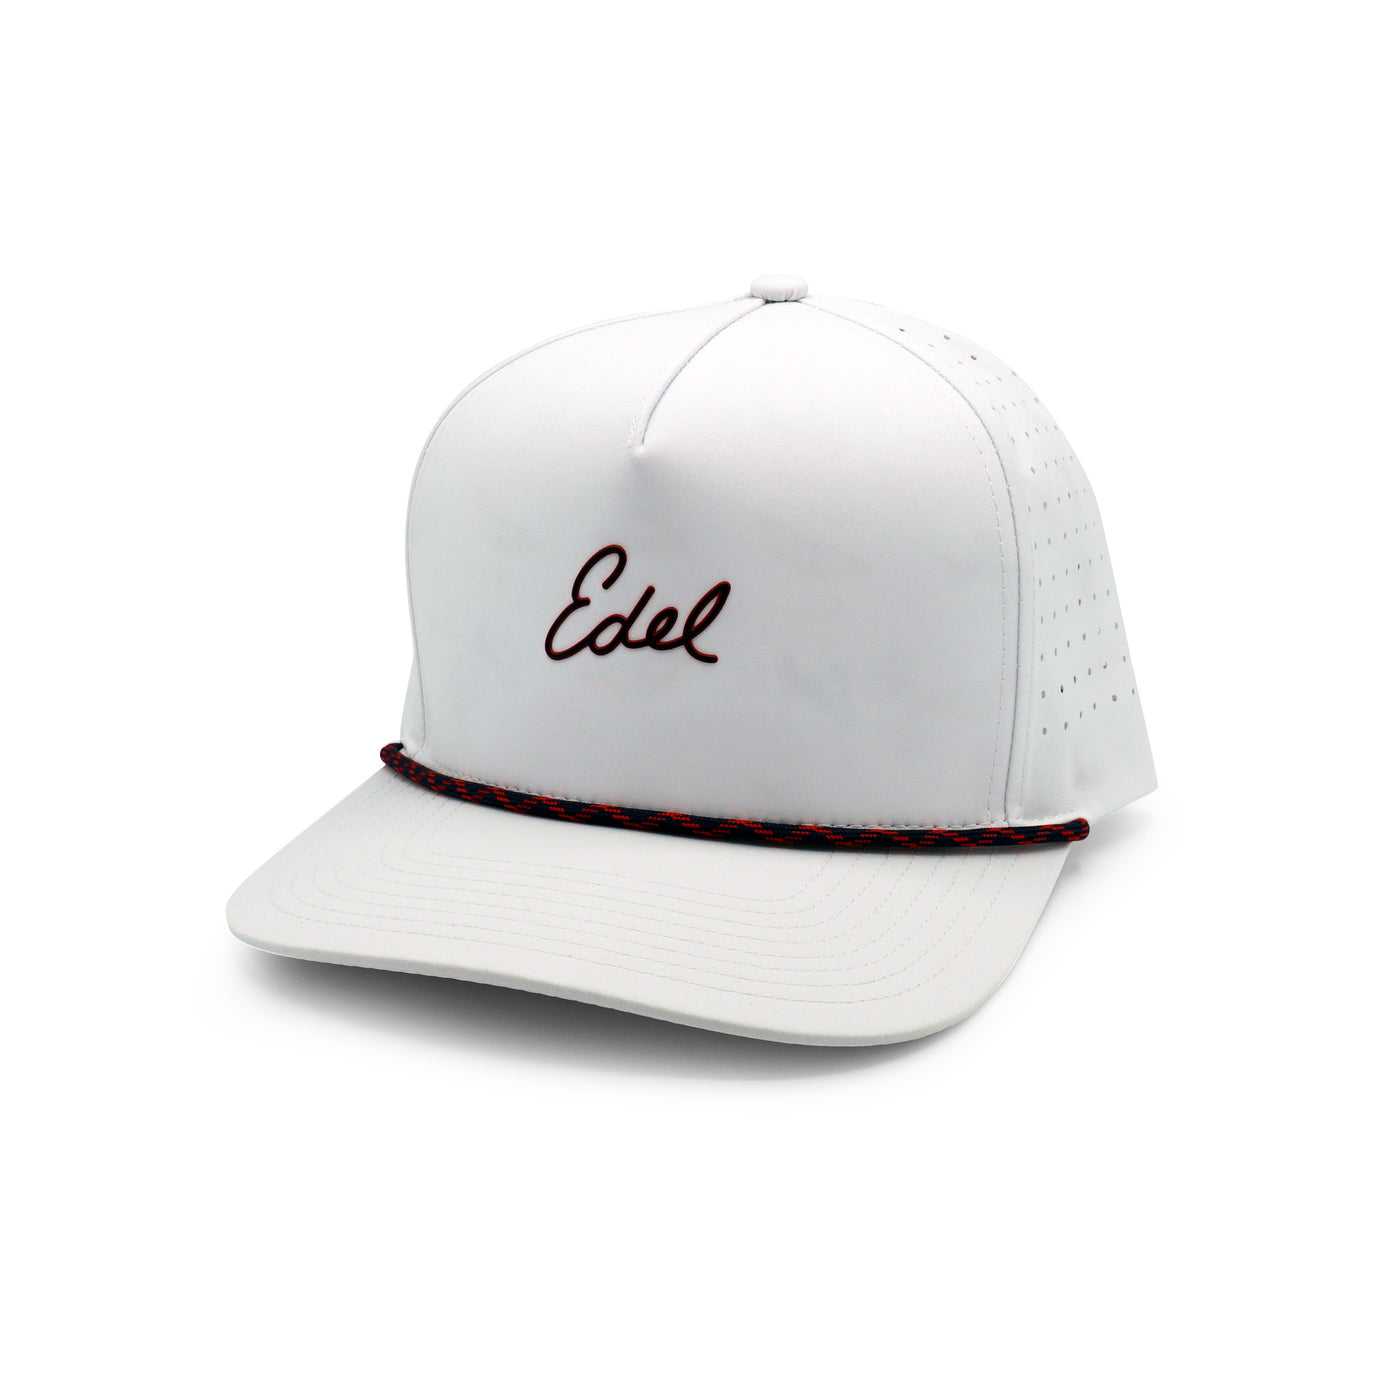 Edel Golf Raised Signature White Rope Hat with Black and Red Accents